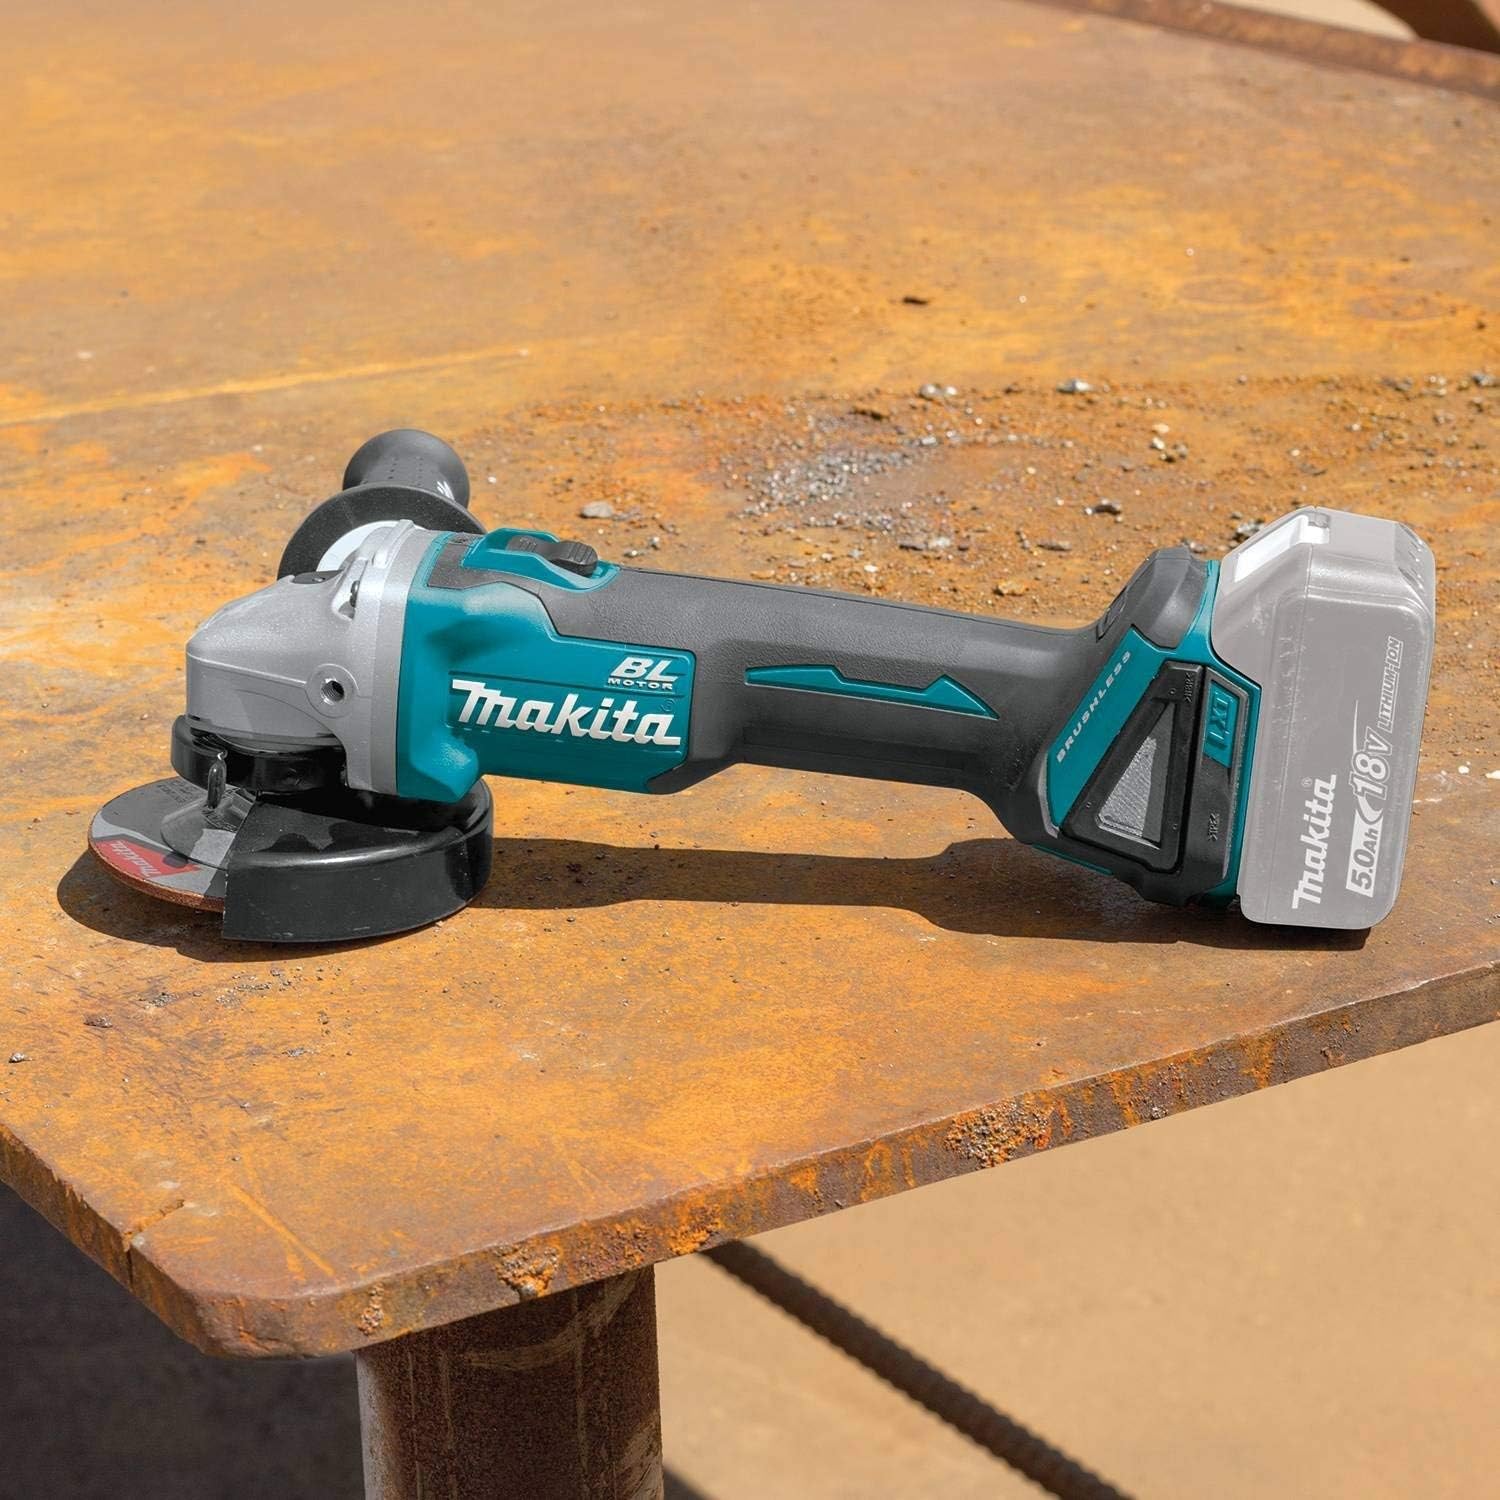 Makita XAG09Z 18V LXT Lithium-Ion Brushless Cordless 4-1/2-Inch / 5-Inch Cut-Off/Angle Grinder, with Electric Brake  BL1840B 18V LXT Lithium-Ion 4.0Ah Battery